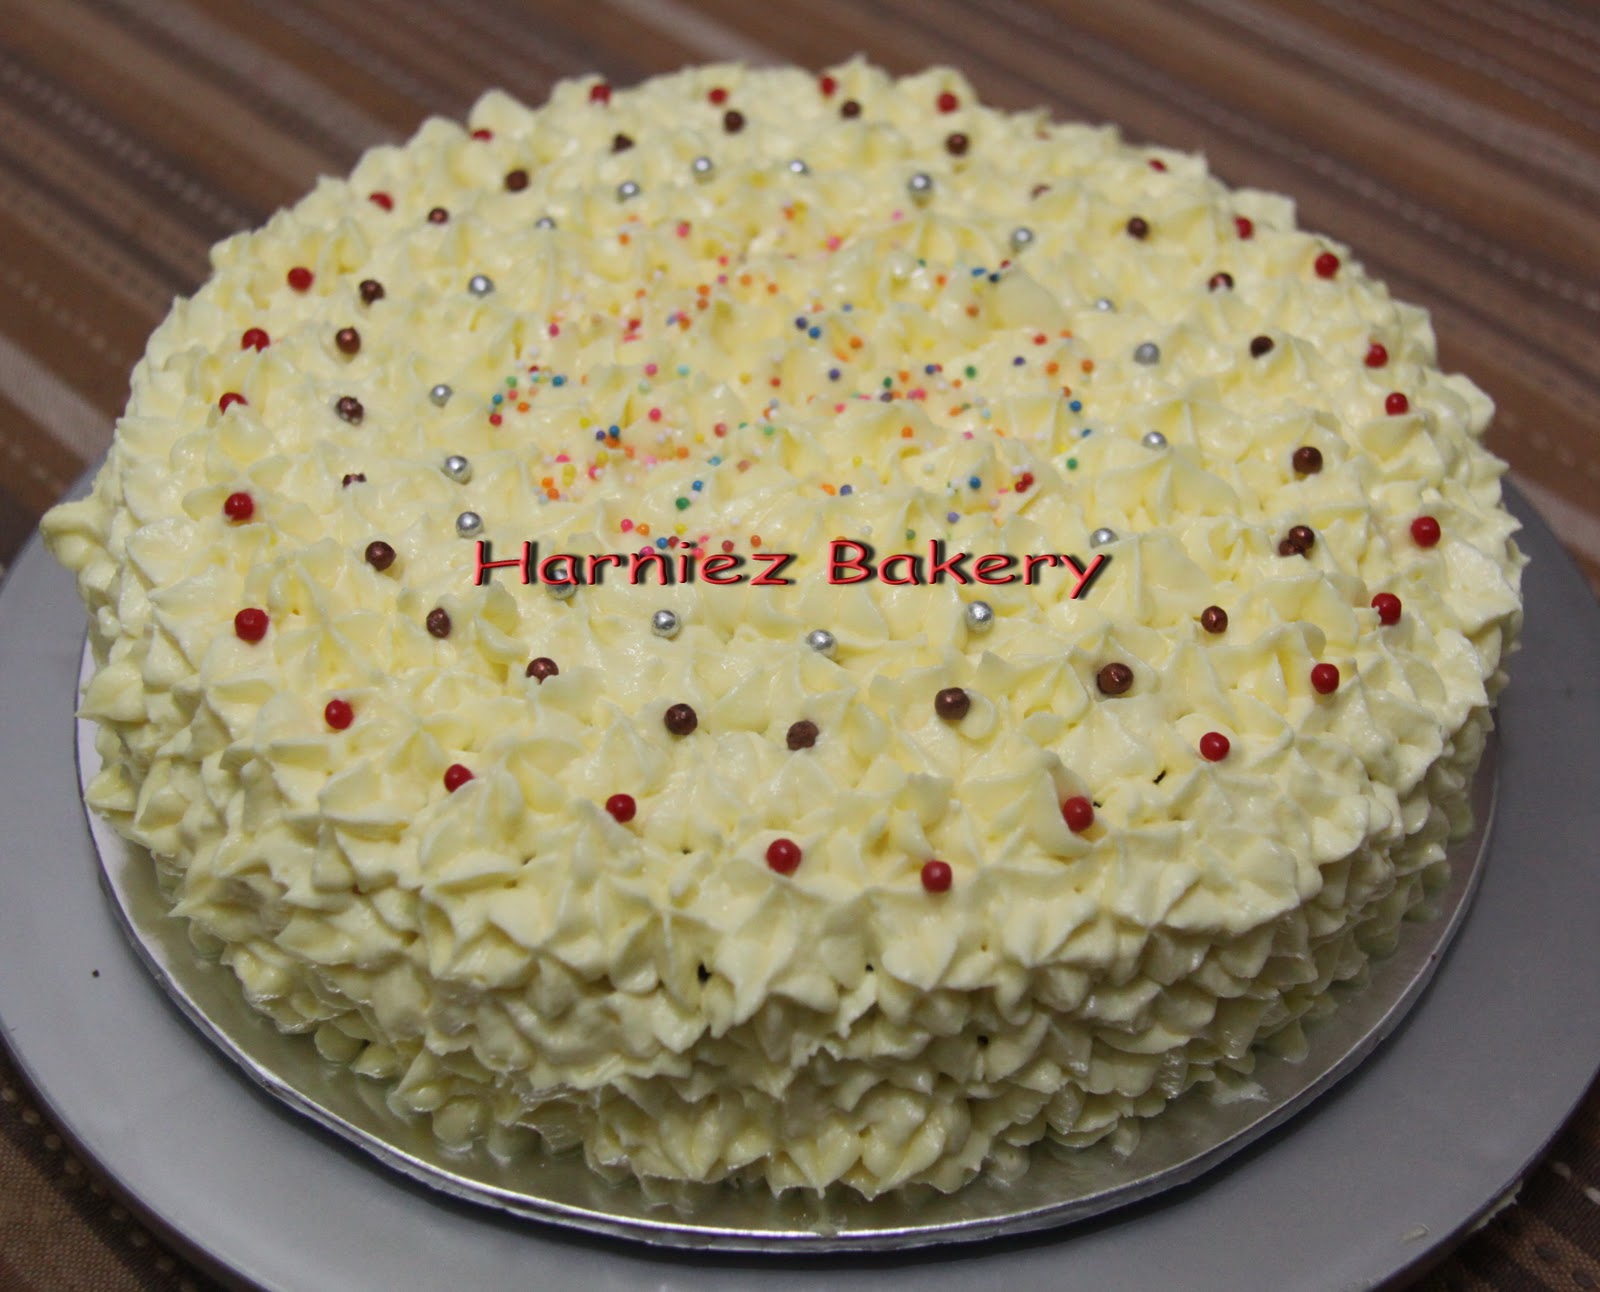 Harniezbakery - Specially for Cup Cakes, Deco Cakes 